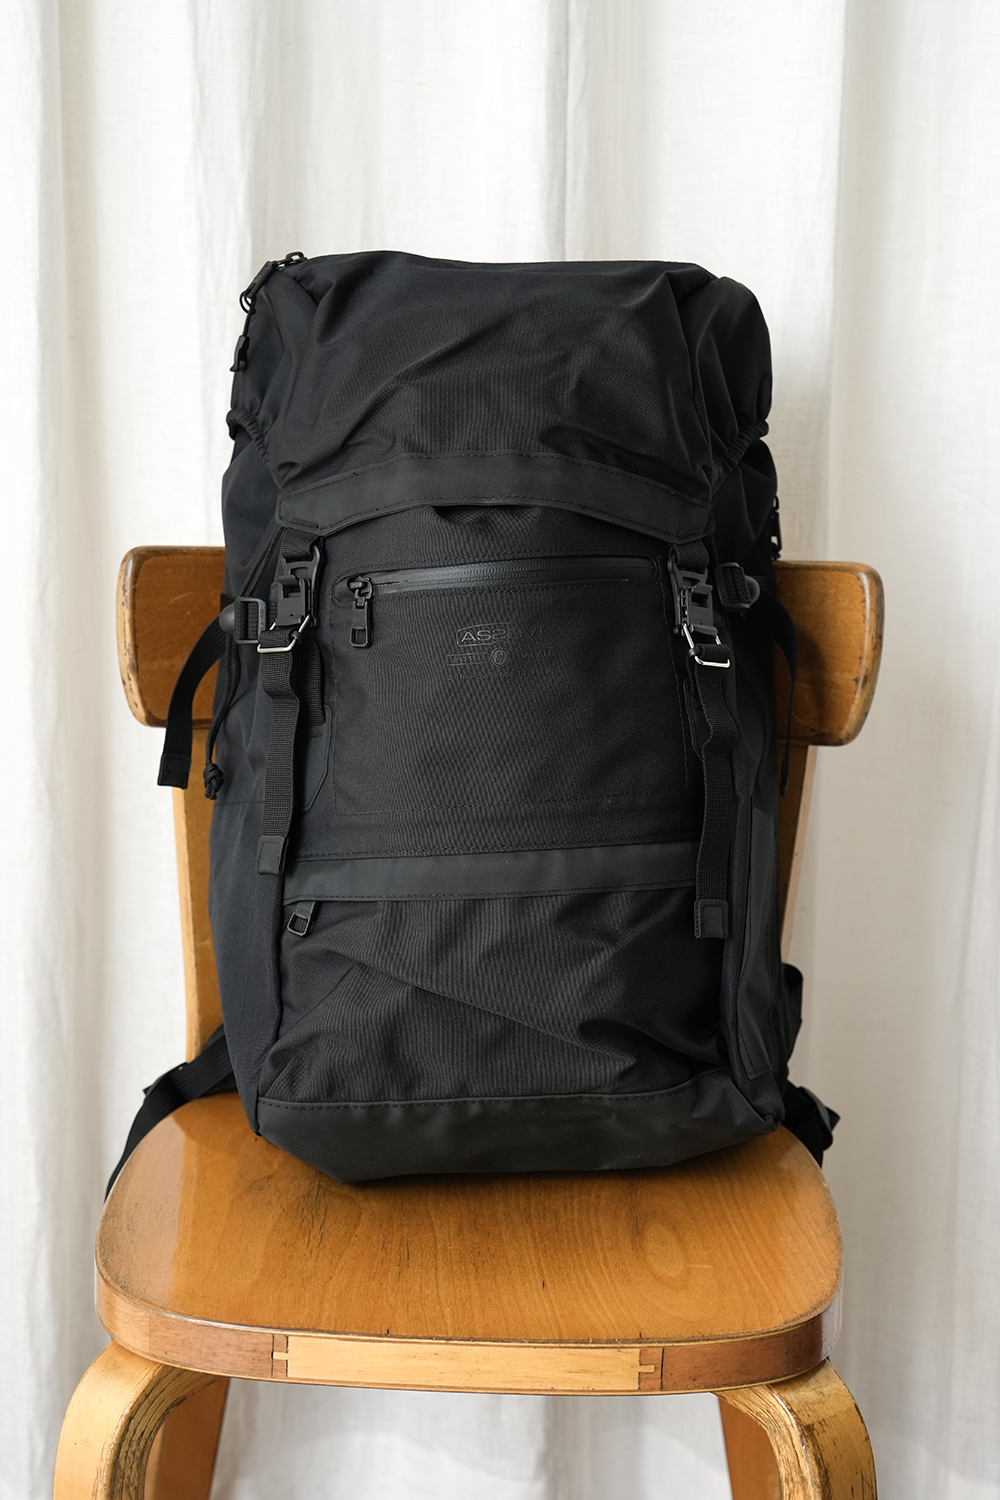 WATER PROOF CORDURA 305D BACK PACK